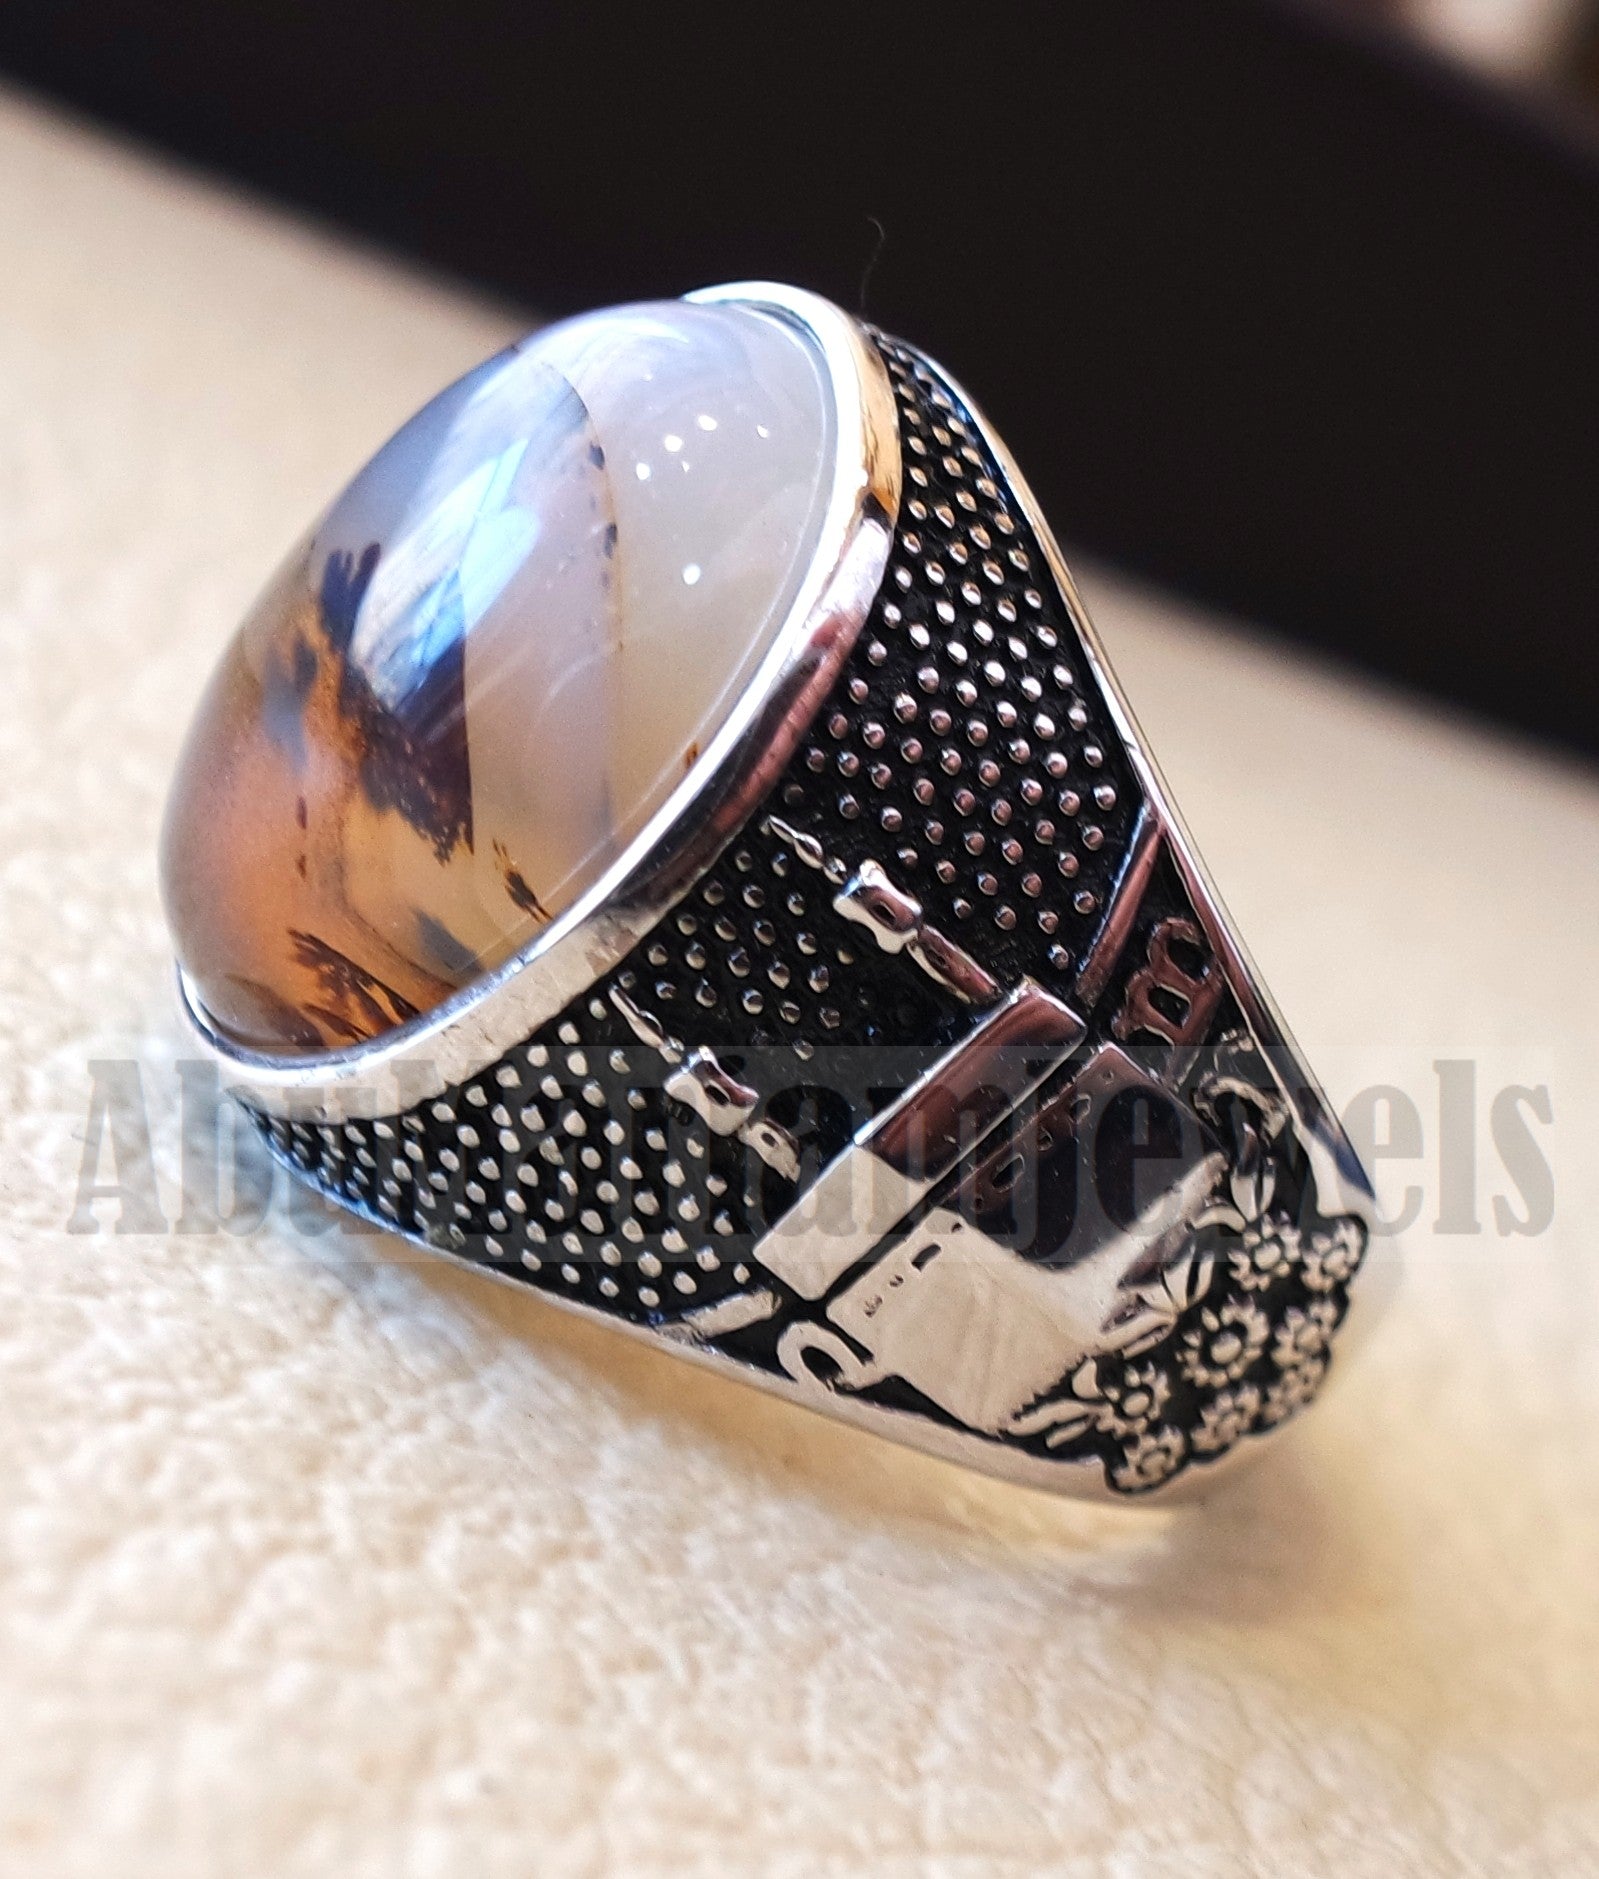 yamani aqeeq natural multi color agate gemstone men muslim mosque ring sterling silver 925 jewelry all sizes عقيق يماني الكعبة